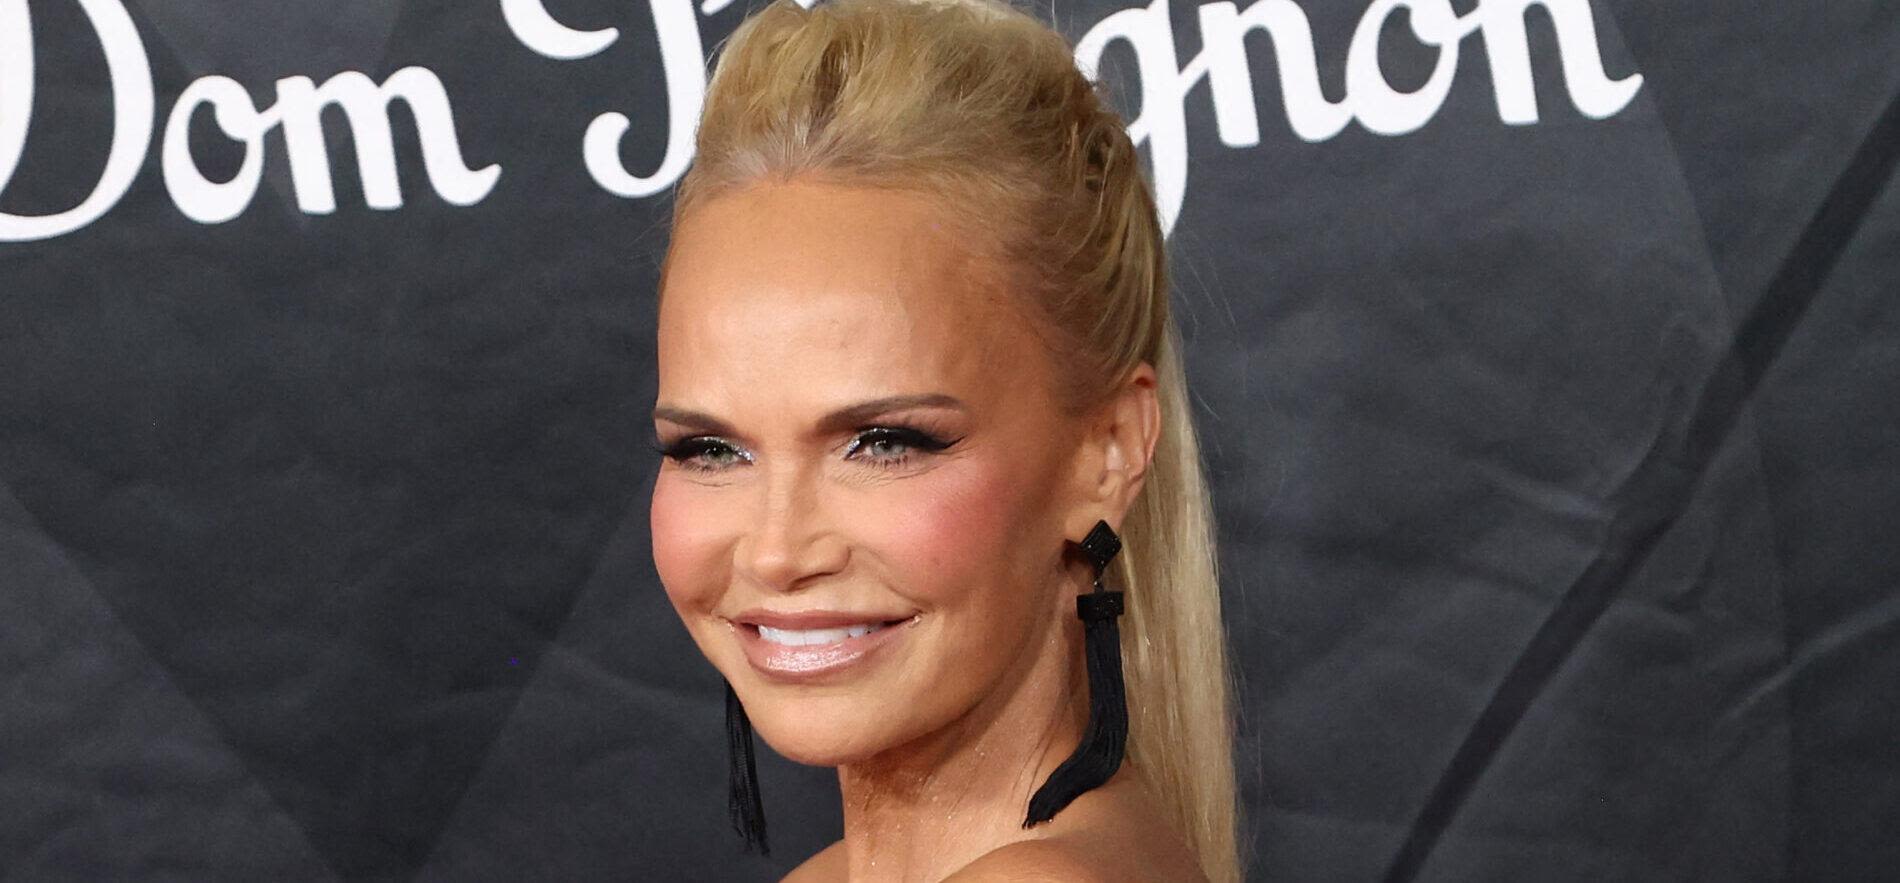 Kristin Chenoweth Reveals She Was 'Severely Abused' Years Ago